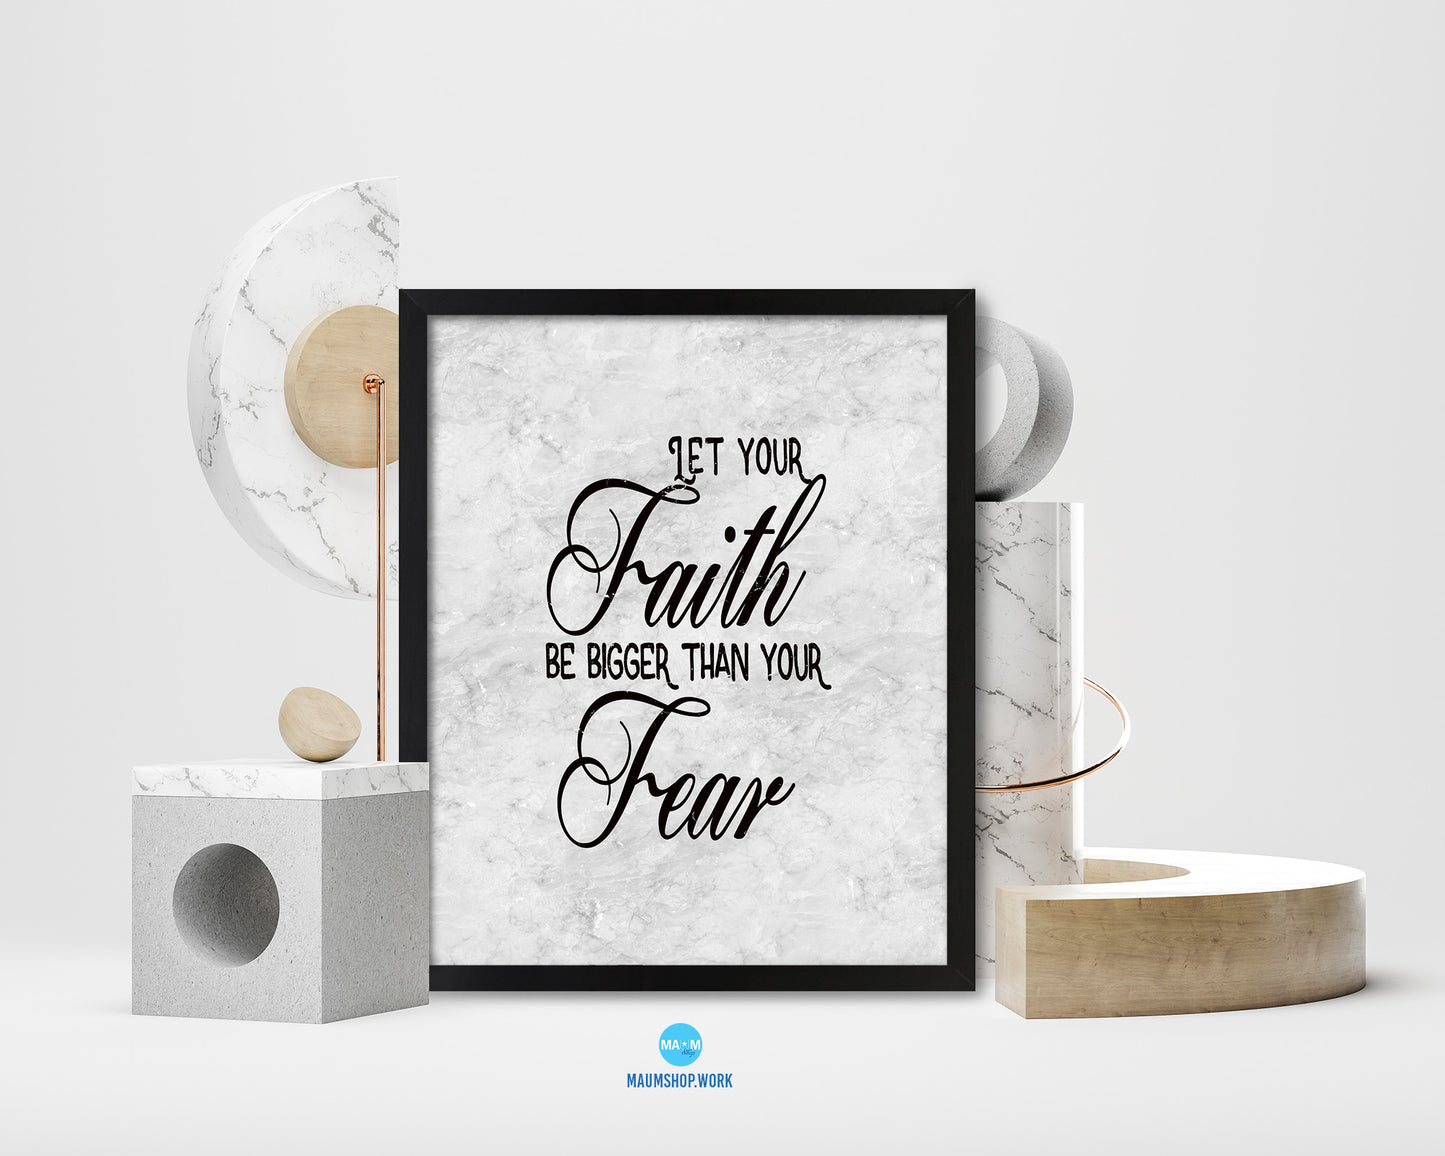 Let your Faith be bigger than your fear Quote Framed Print Wall Art Decor Gifts